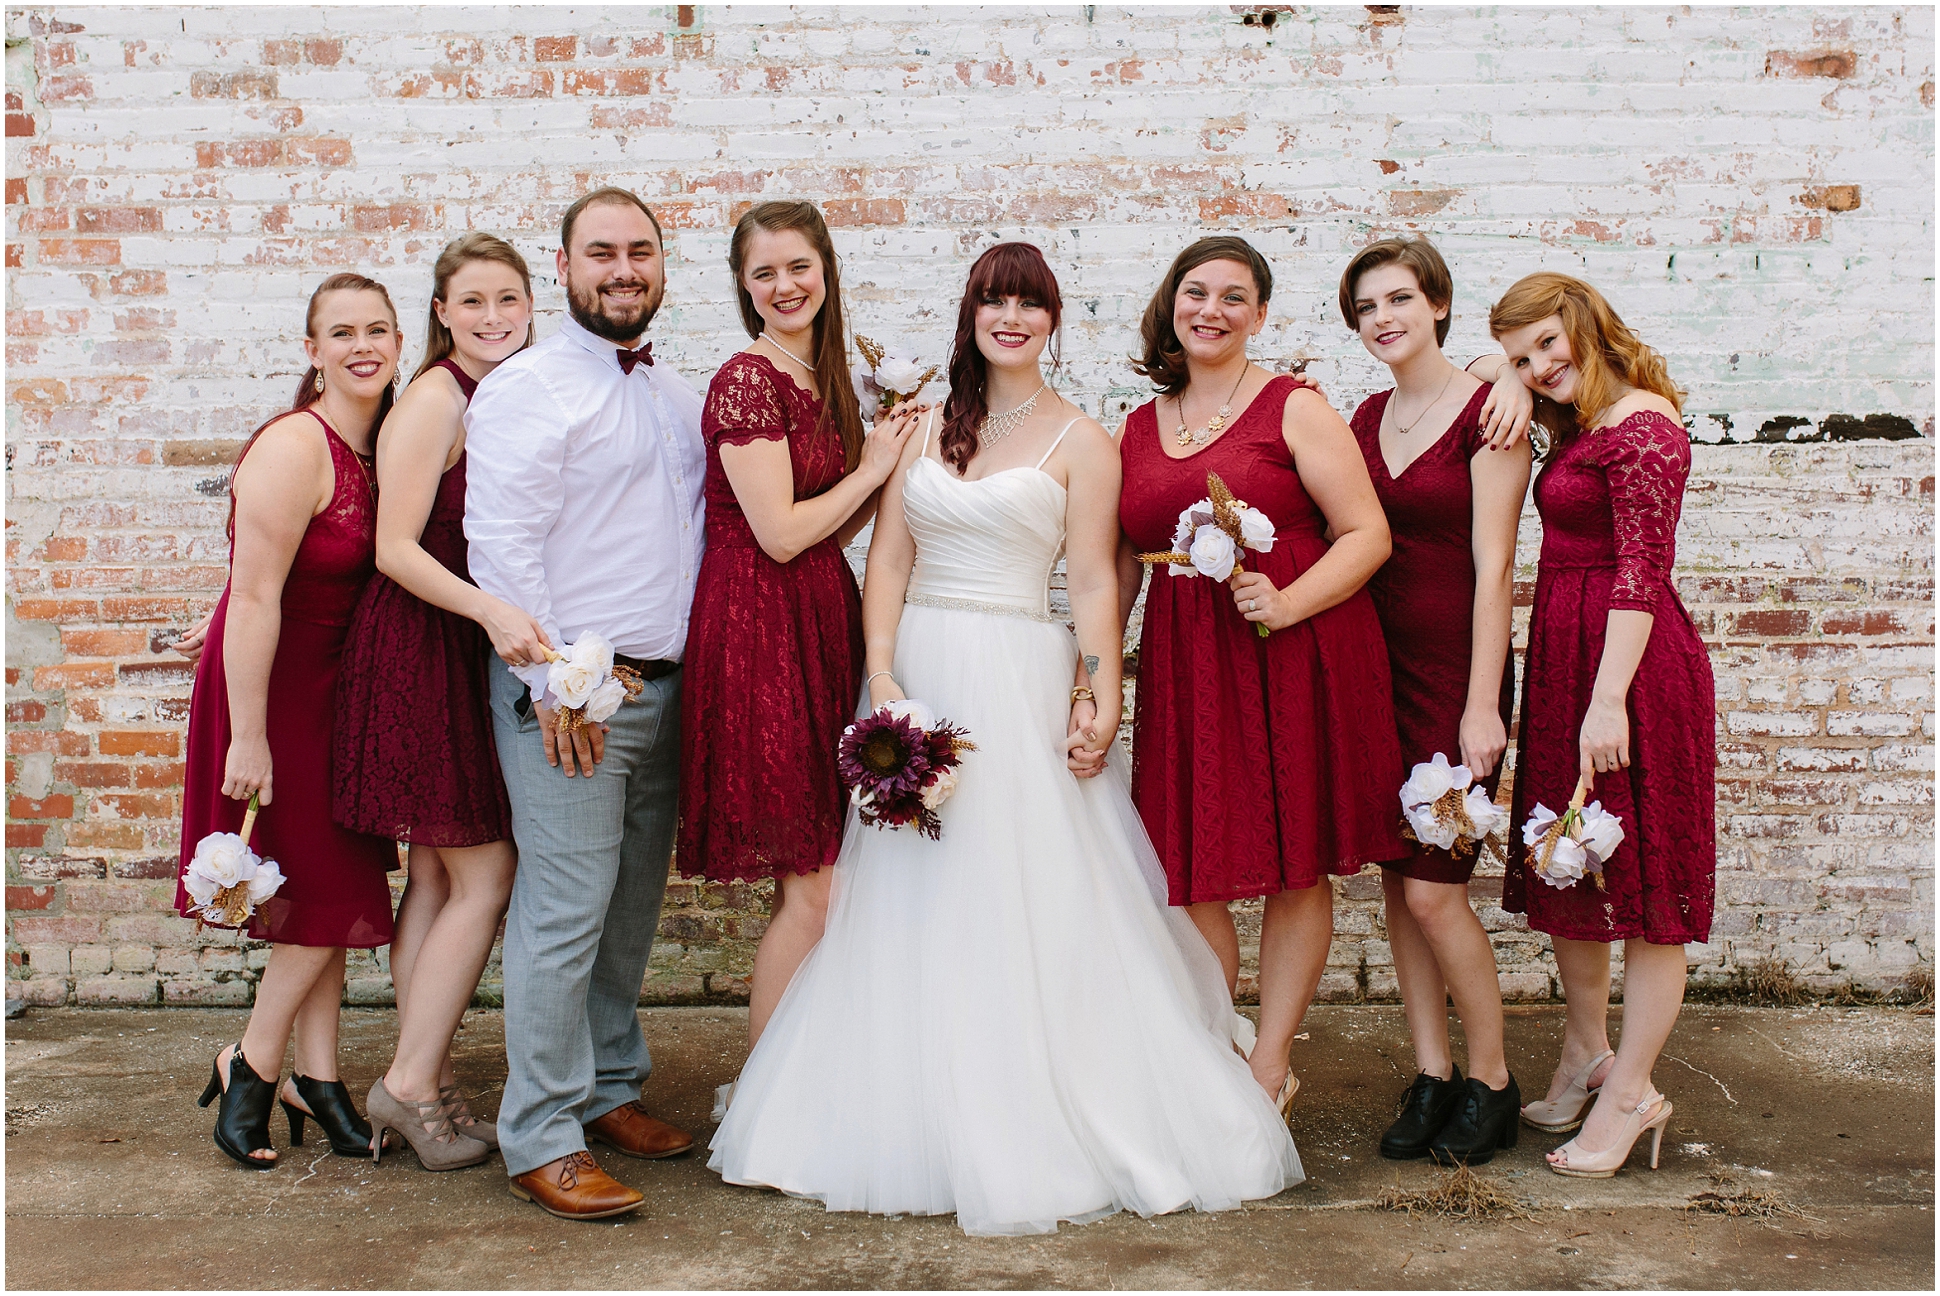 The Old Jefferson Cotton Mill Industrial Wedding | Old Jefferson Cotton Mill | Athens, Georgia Wedding Photographers | Two Chics Photography | www.twochicsphotography.com